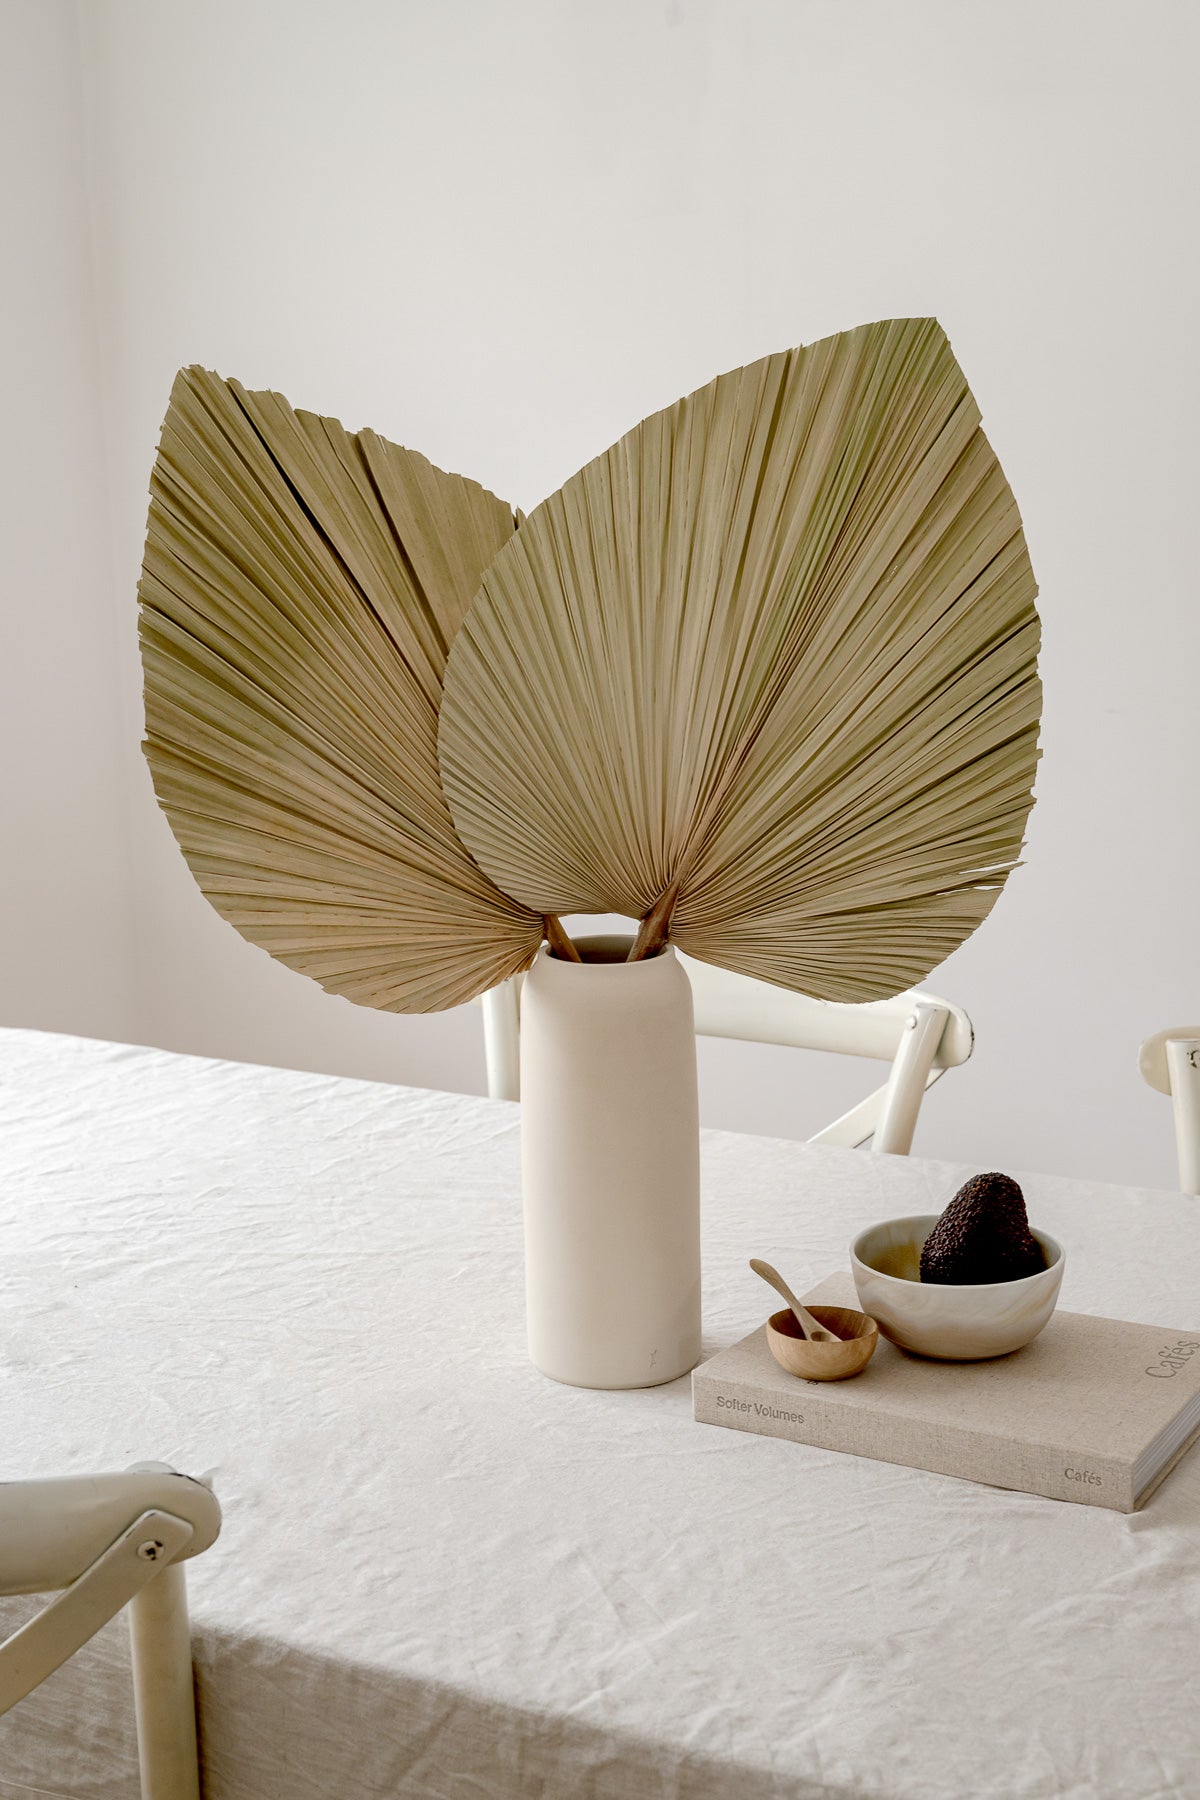 Large Dried Palm Leaves - Set of 3